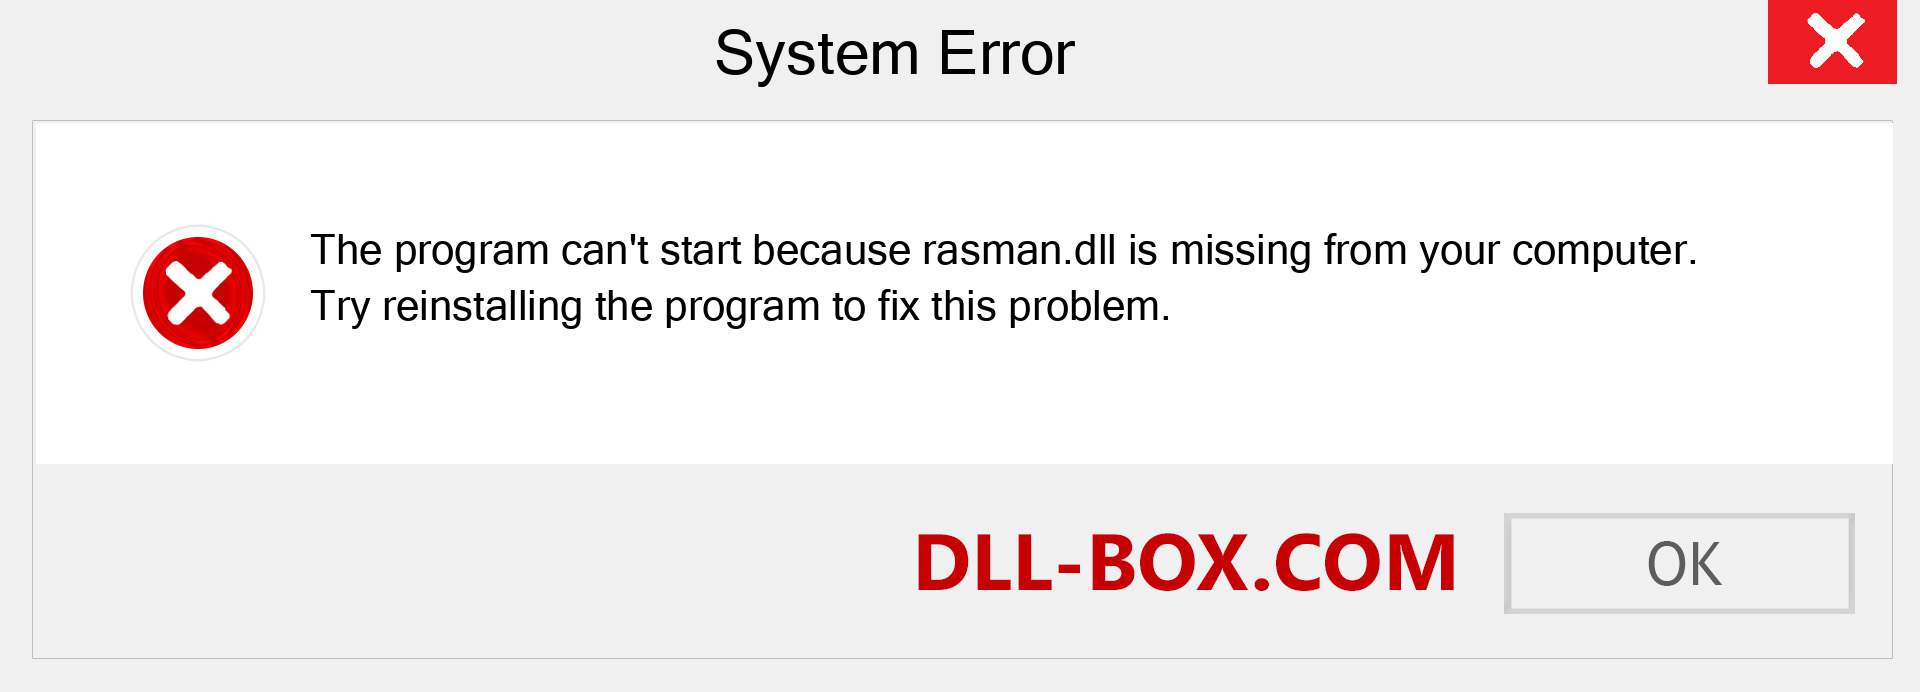  rasman.dll file is missing?. Download for Windows 7, 8, 10 - Fix  rasman dll Missing Error on Windows, photos, images